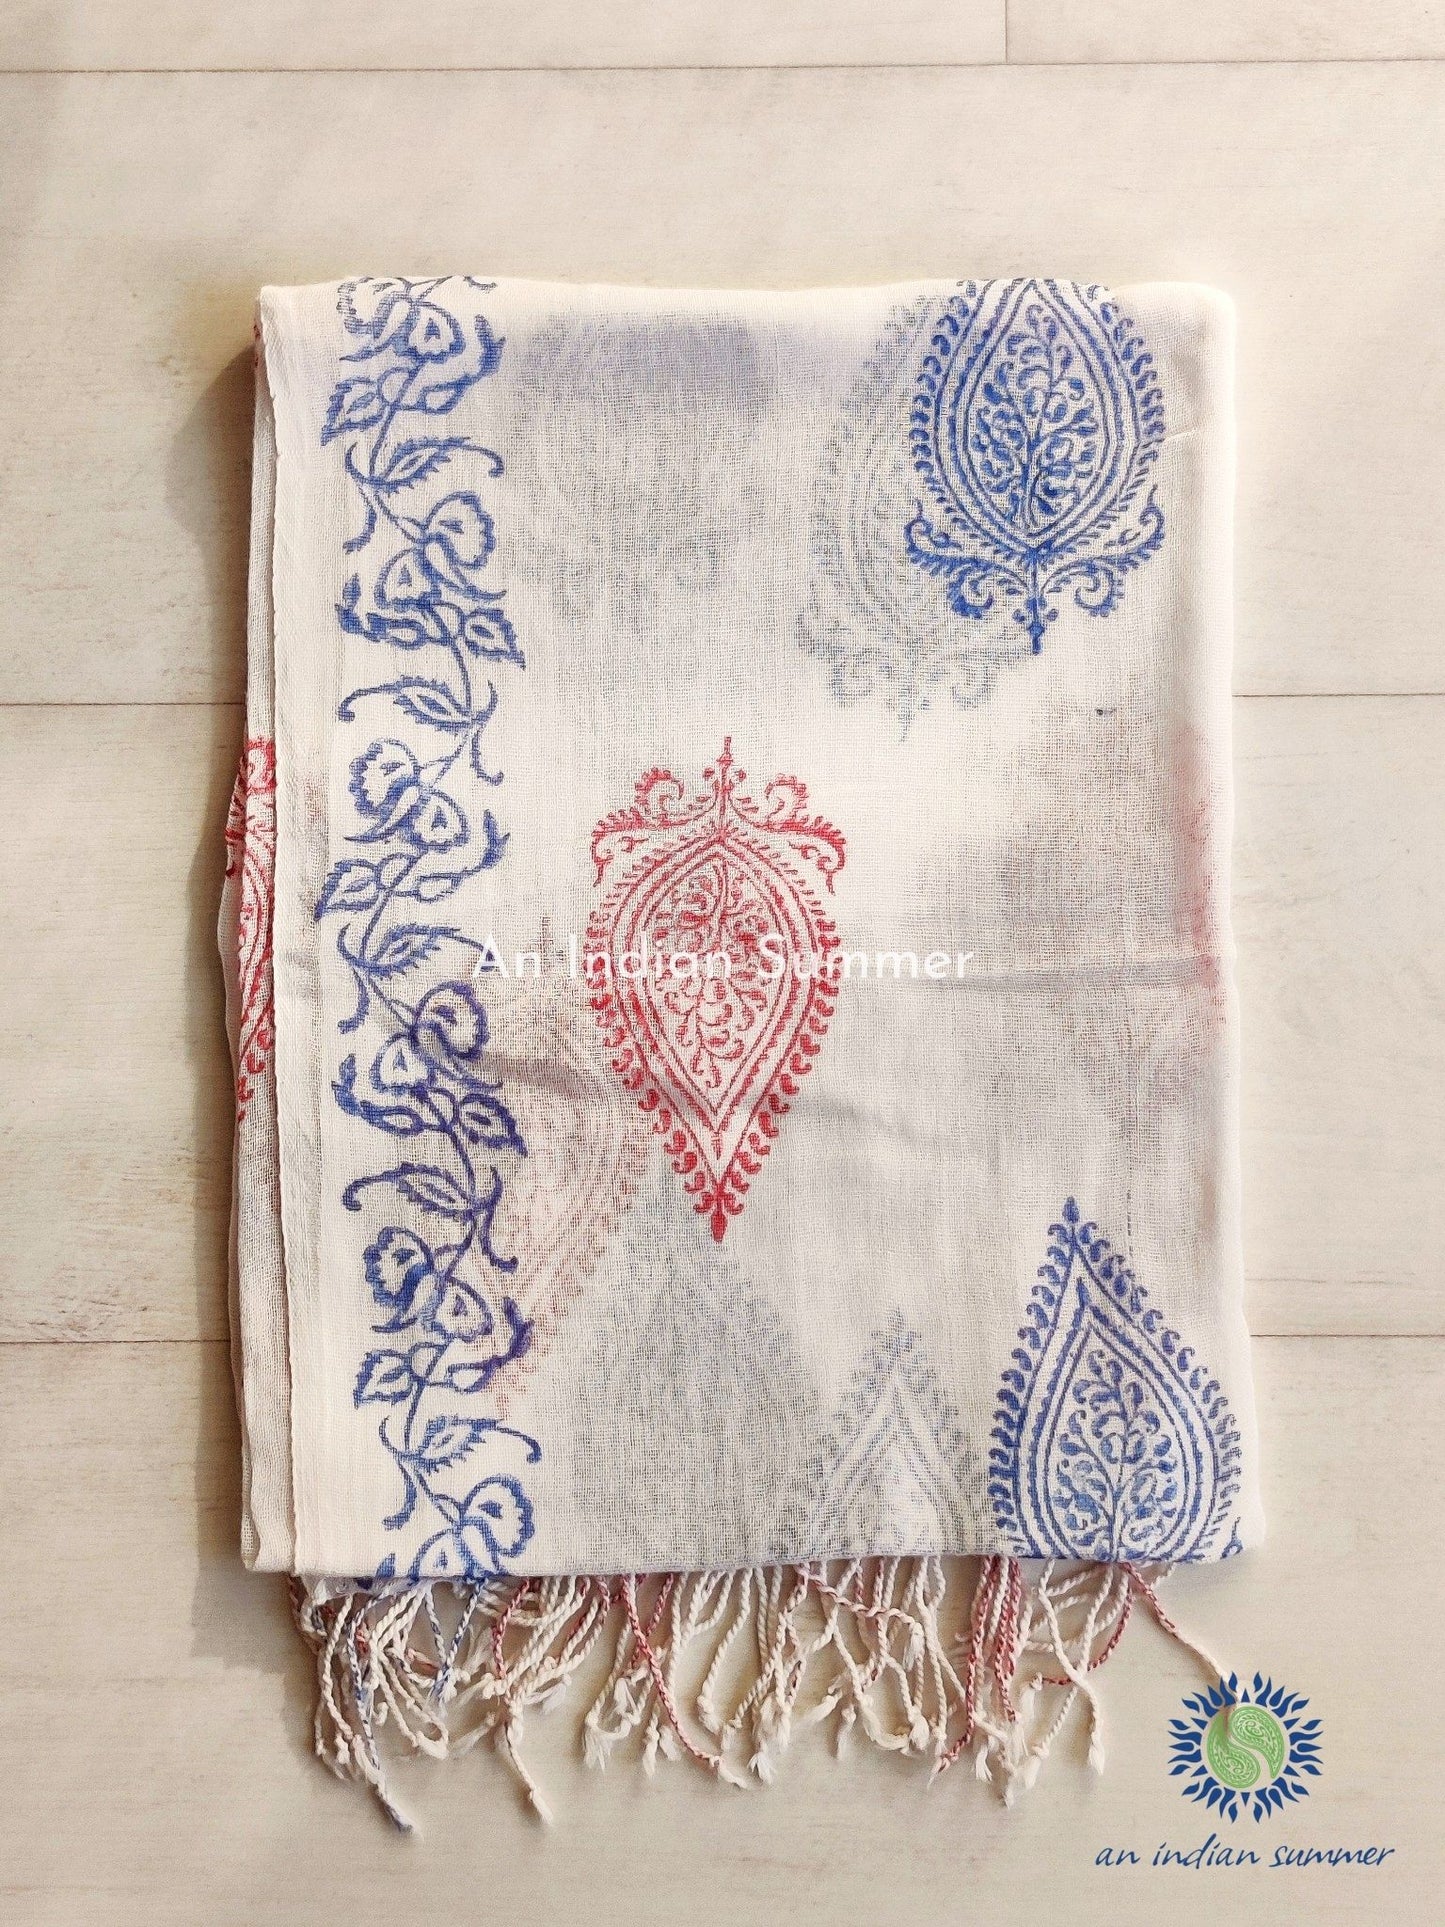 An Indian Summer Blue Red Leaf Handloom Woven Hand Block Printed Cotton Gauze Scarf